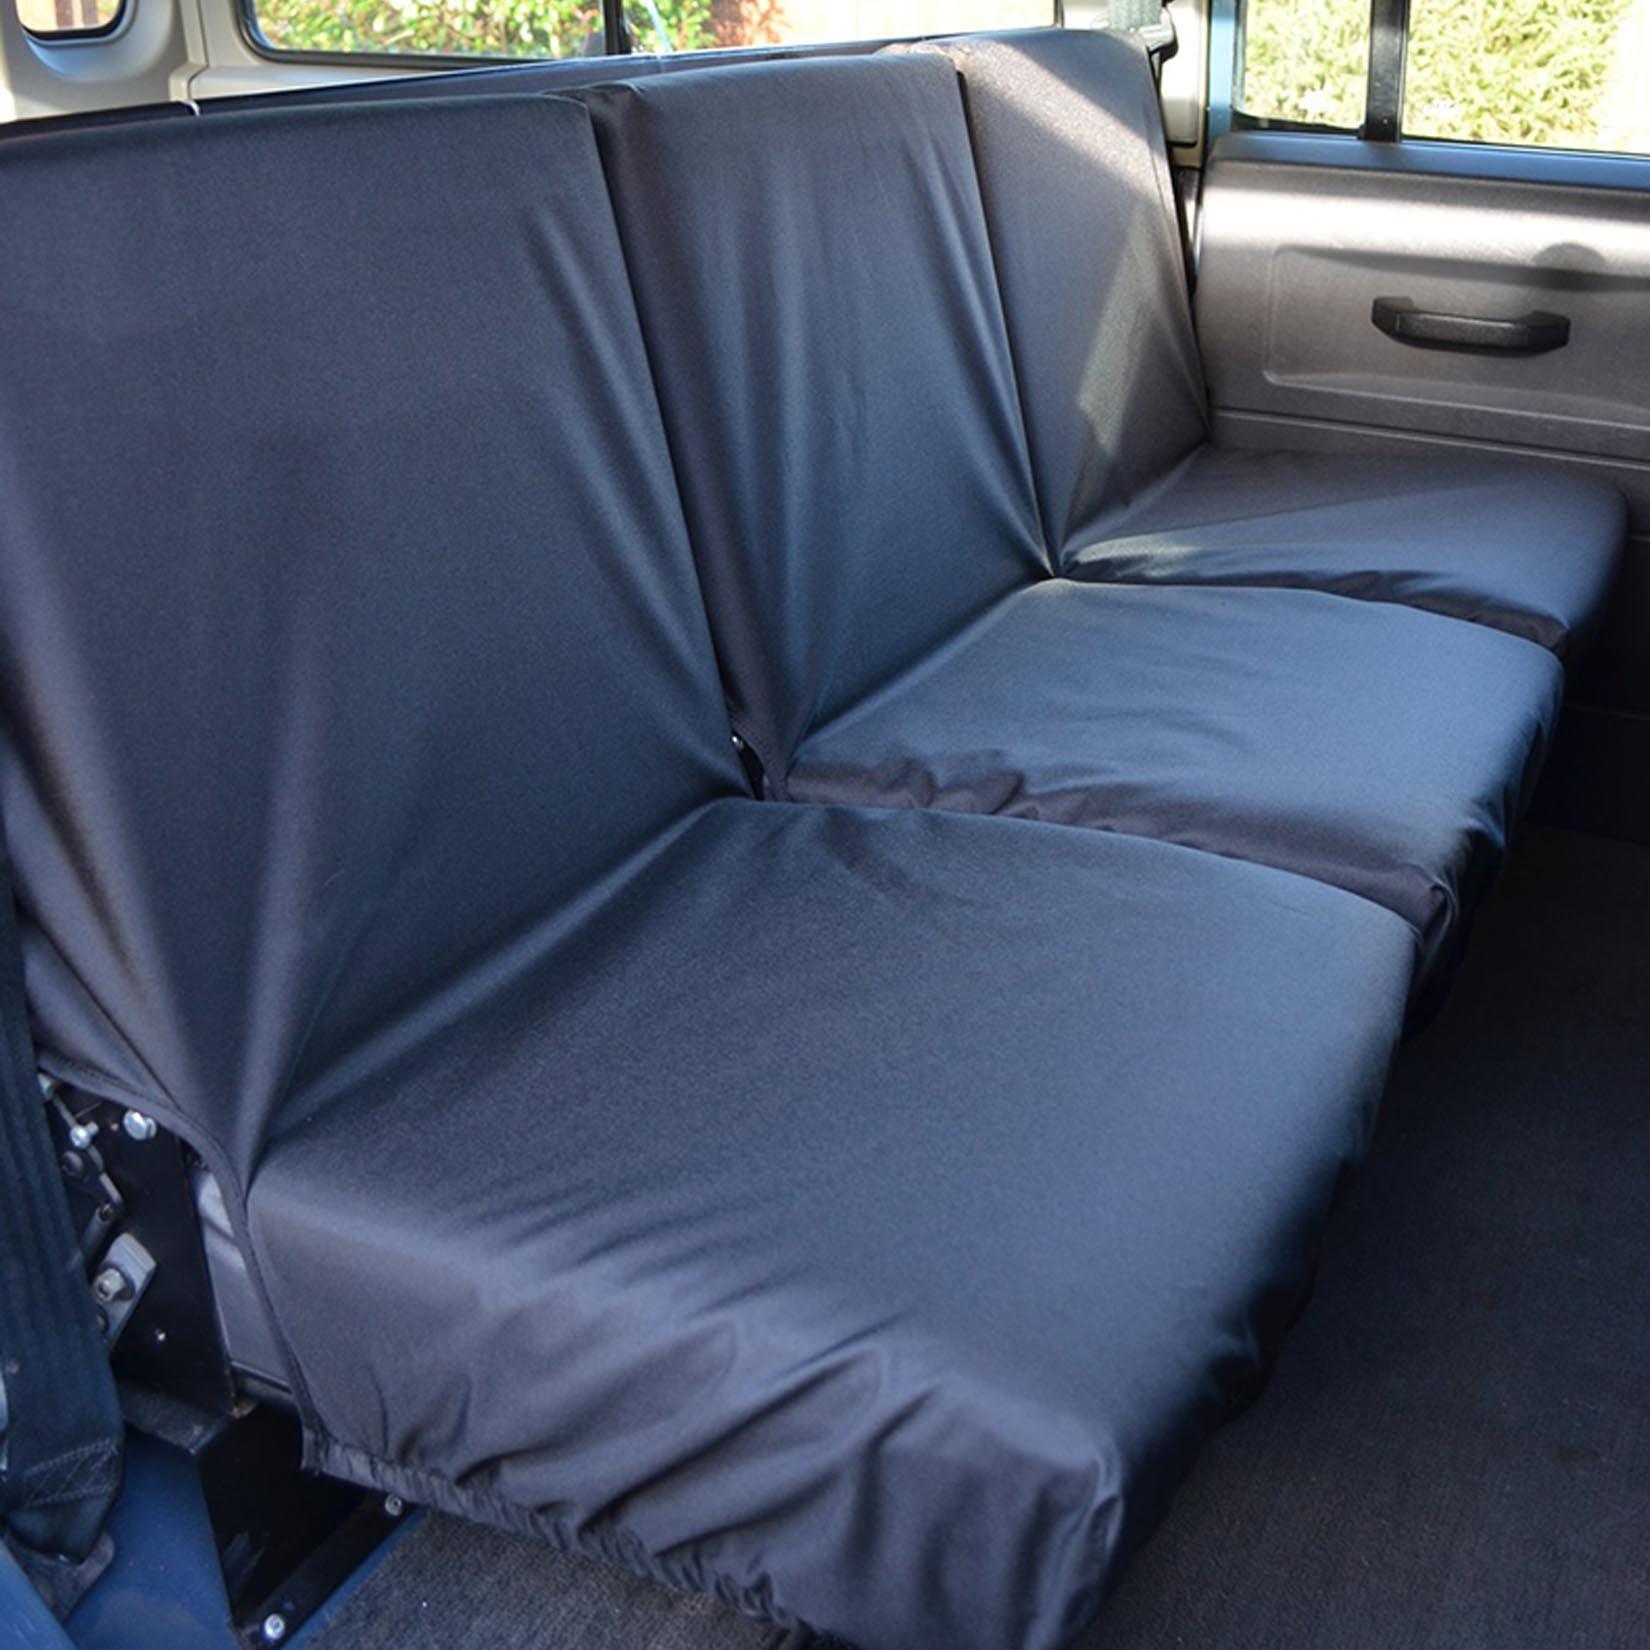 LAND ROVER DEFENDER 90 110 - 1983-2007 REAR SINGLE SEAT COVERS – BLACK - Storm Xccessories2